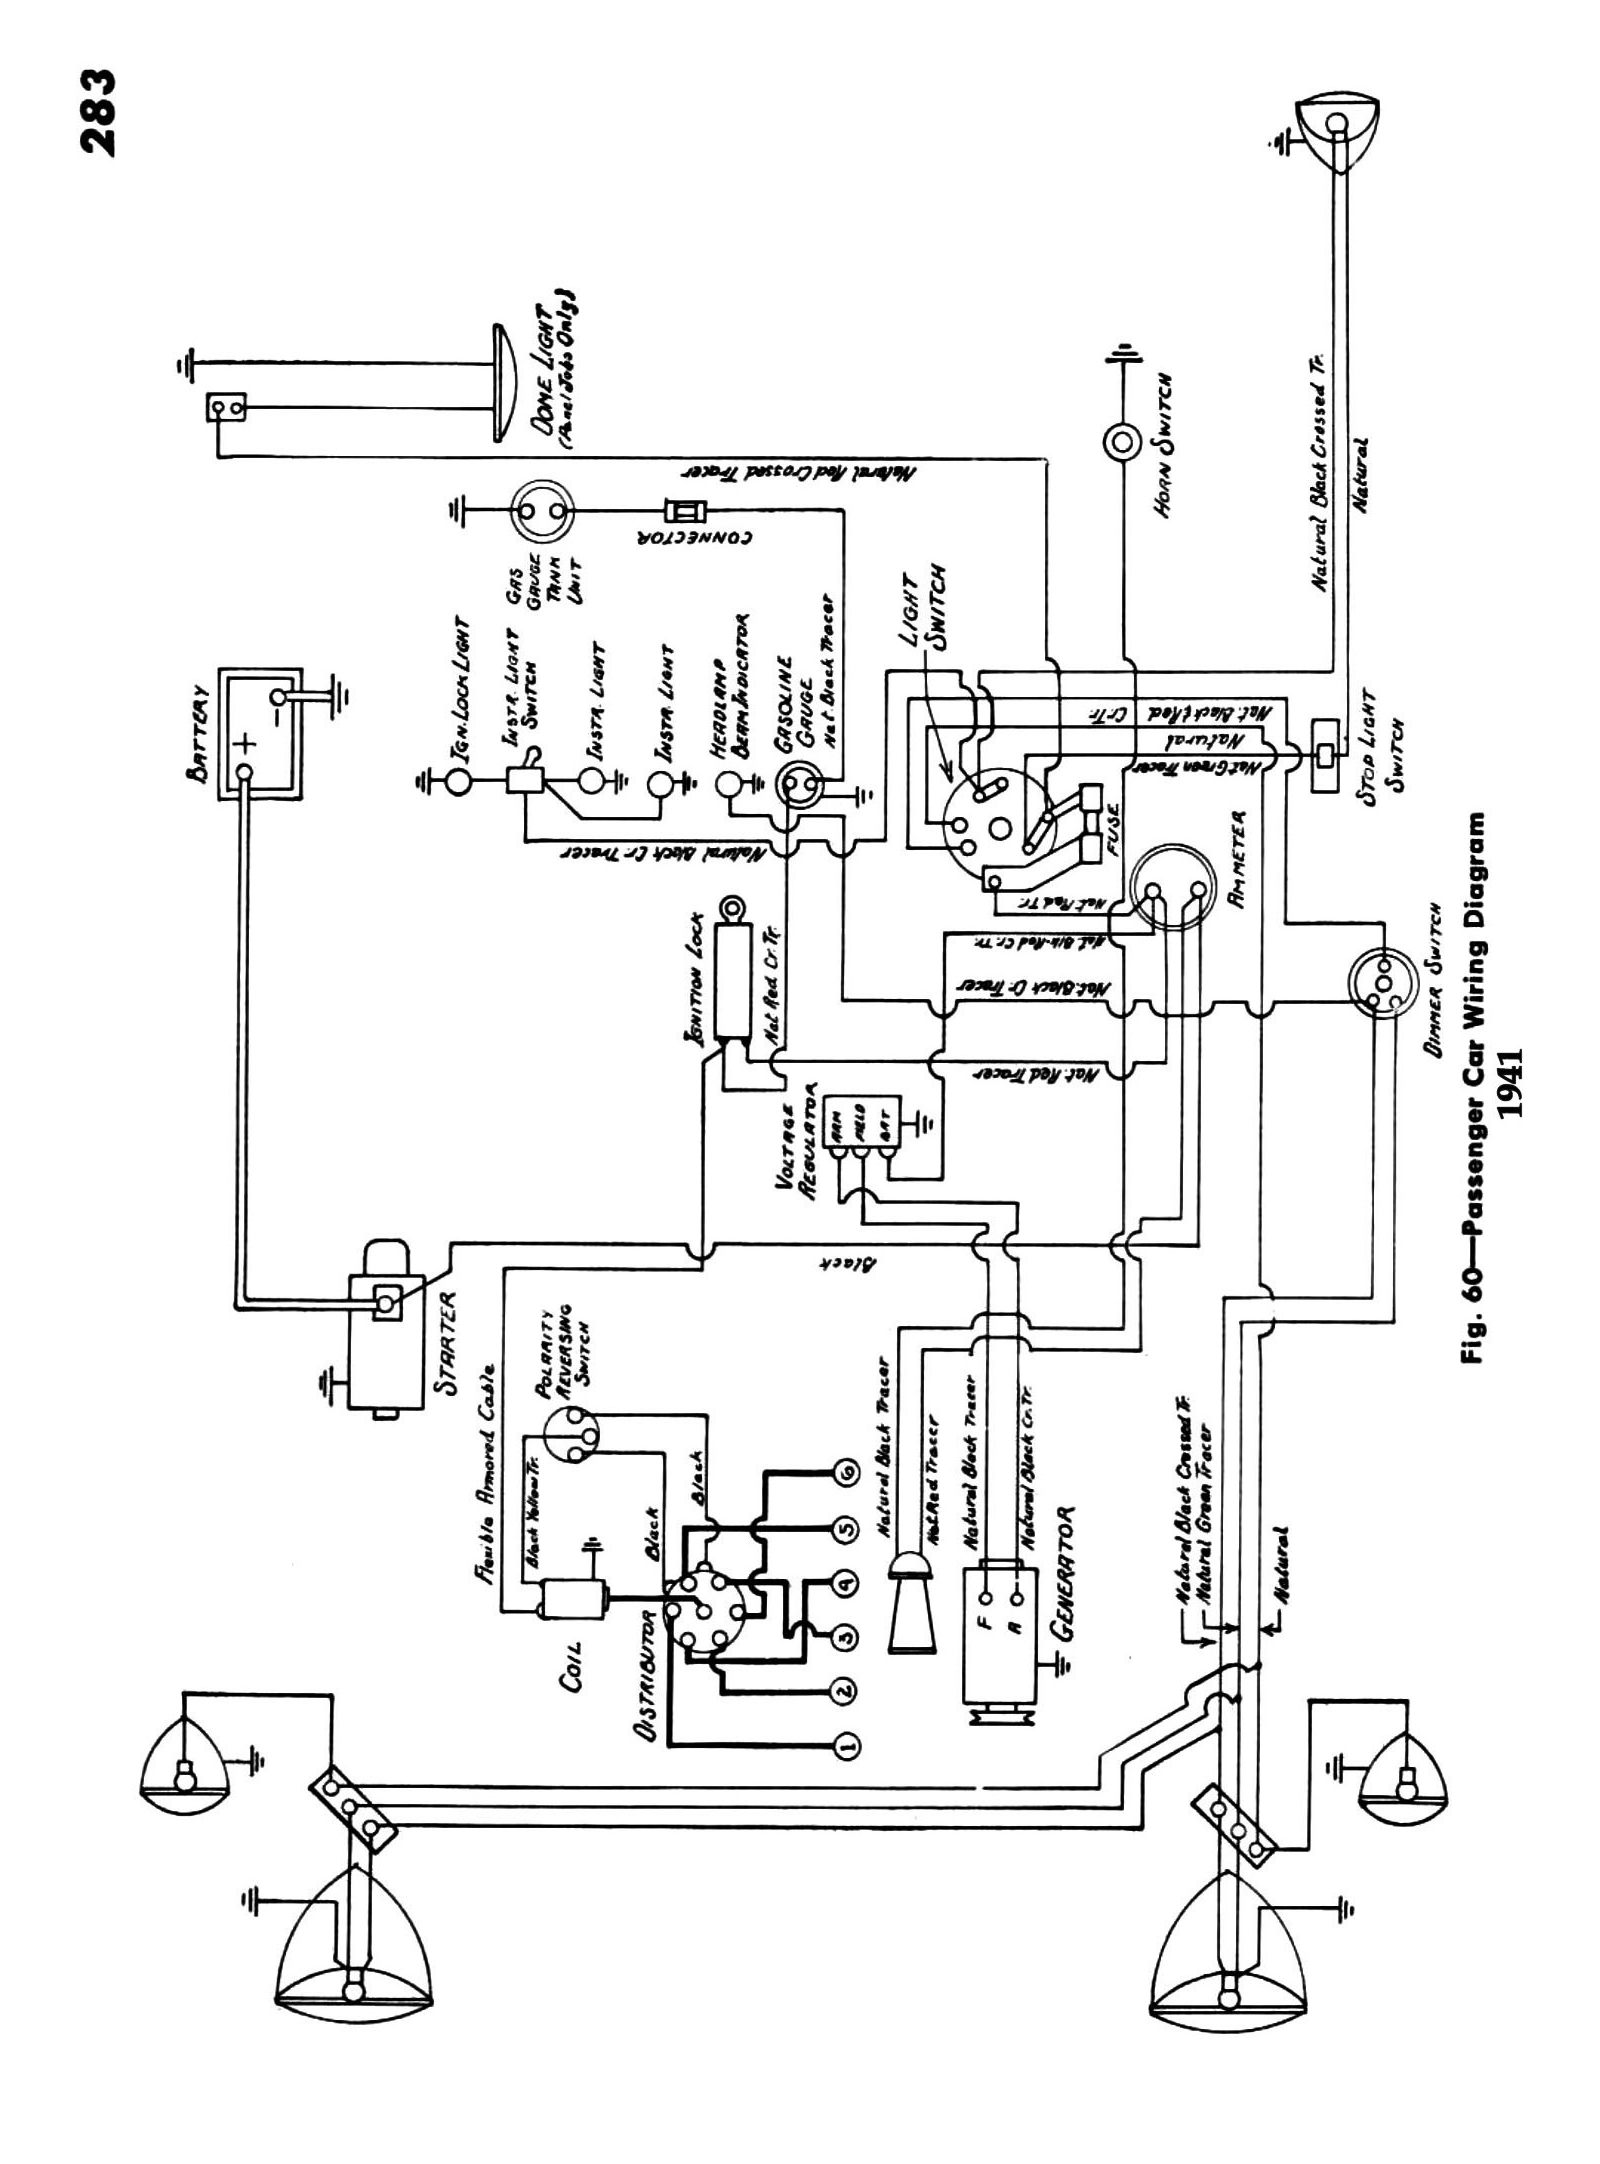 Chevy Wiring Diagrams, Chevrolet Truck Wiring Diagrams Free